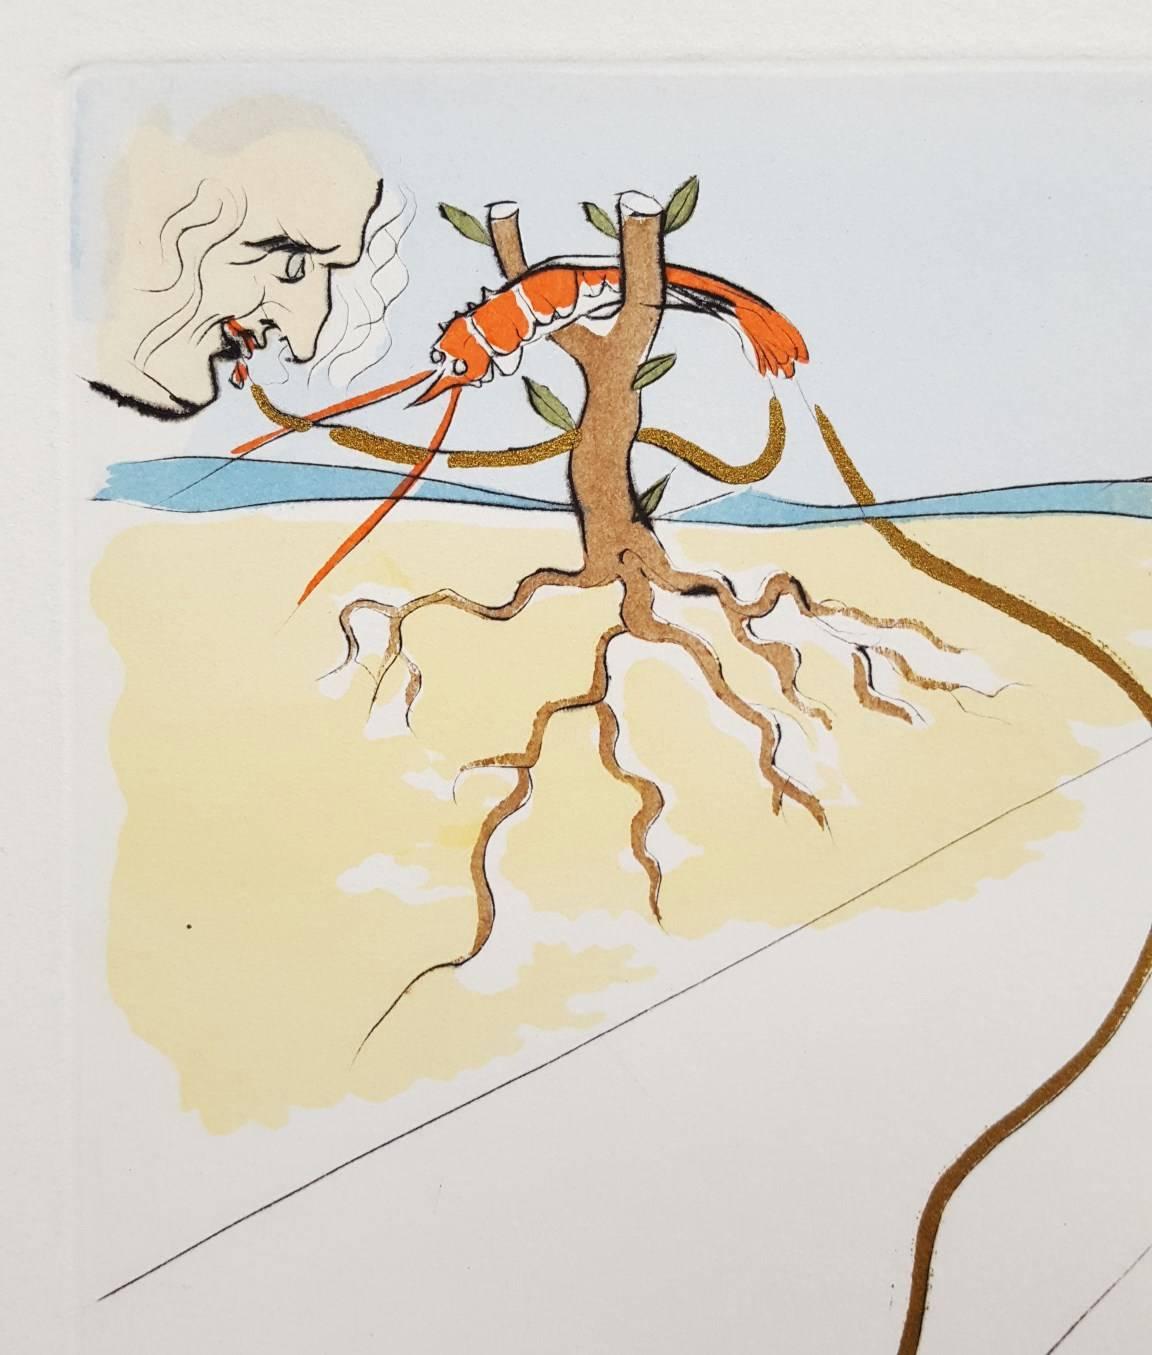 An original drypoint etching with color by pochoir by Spanish artist Salvador Dali (1904-1989) titled 